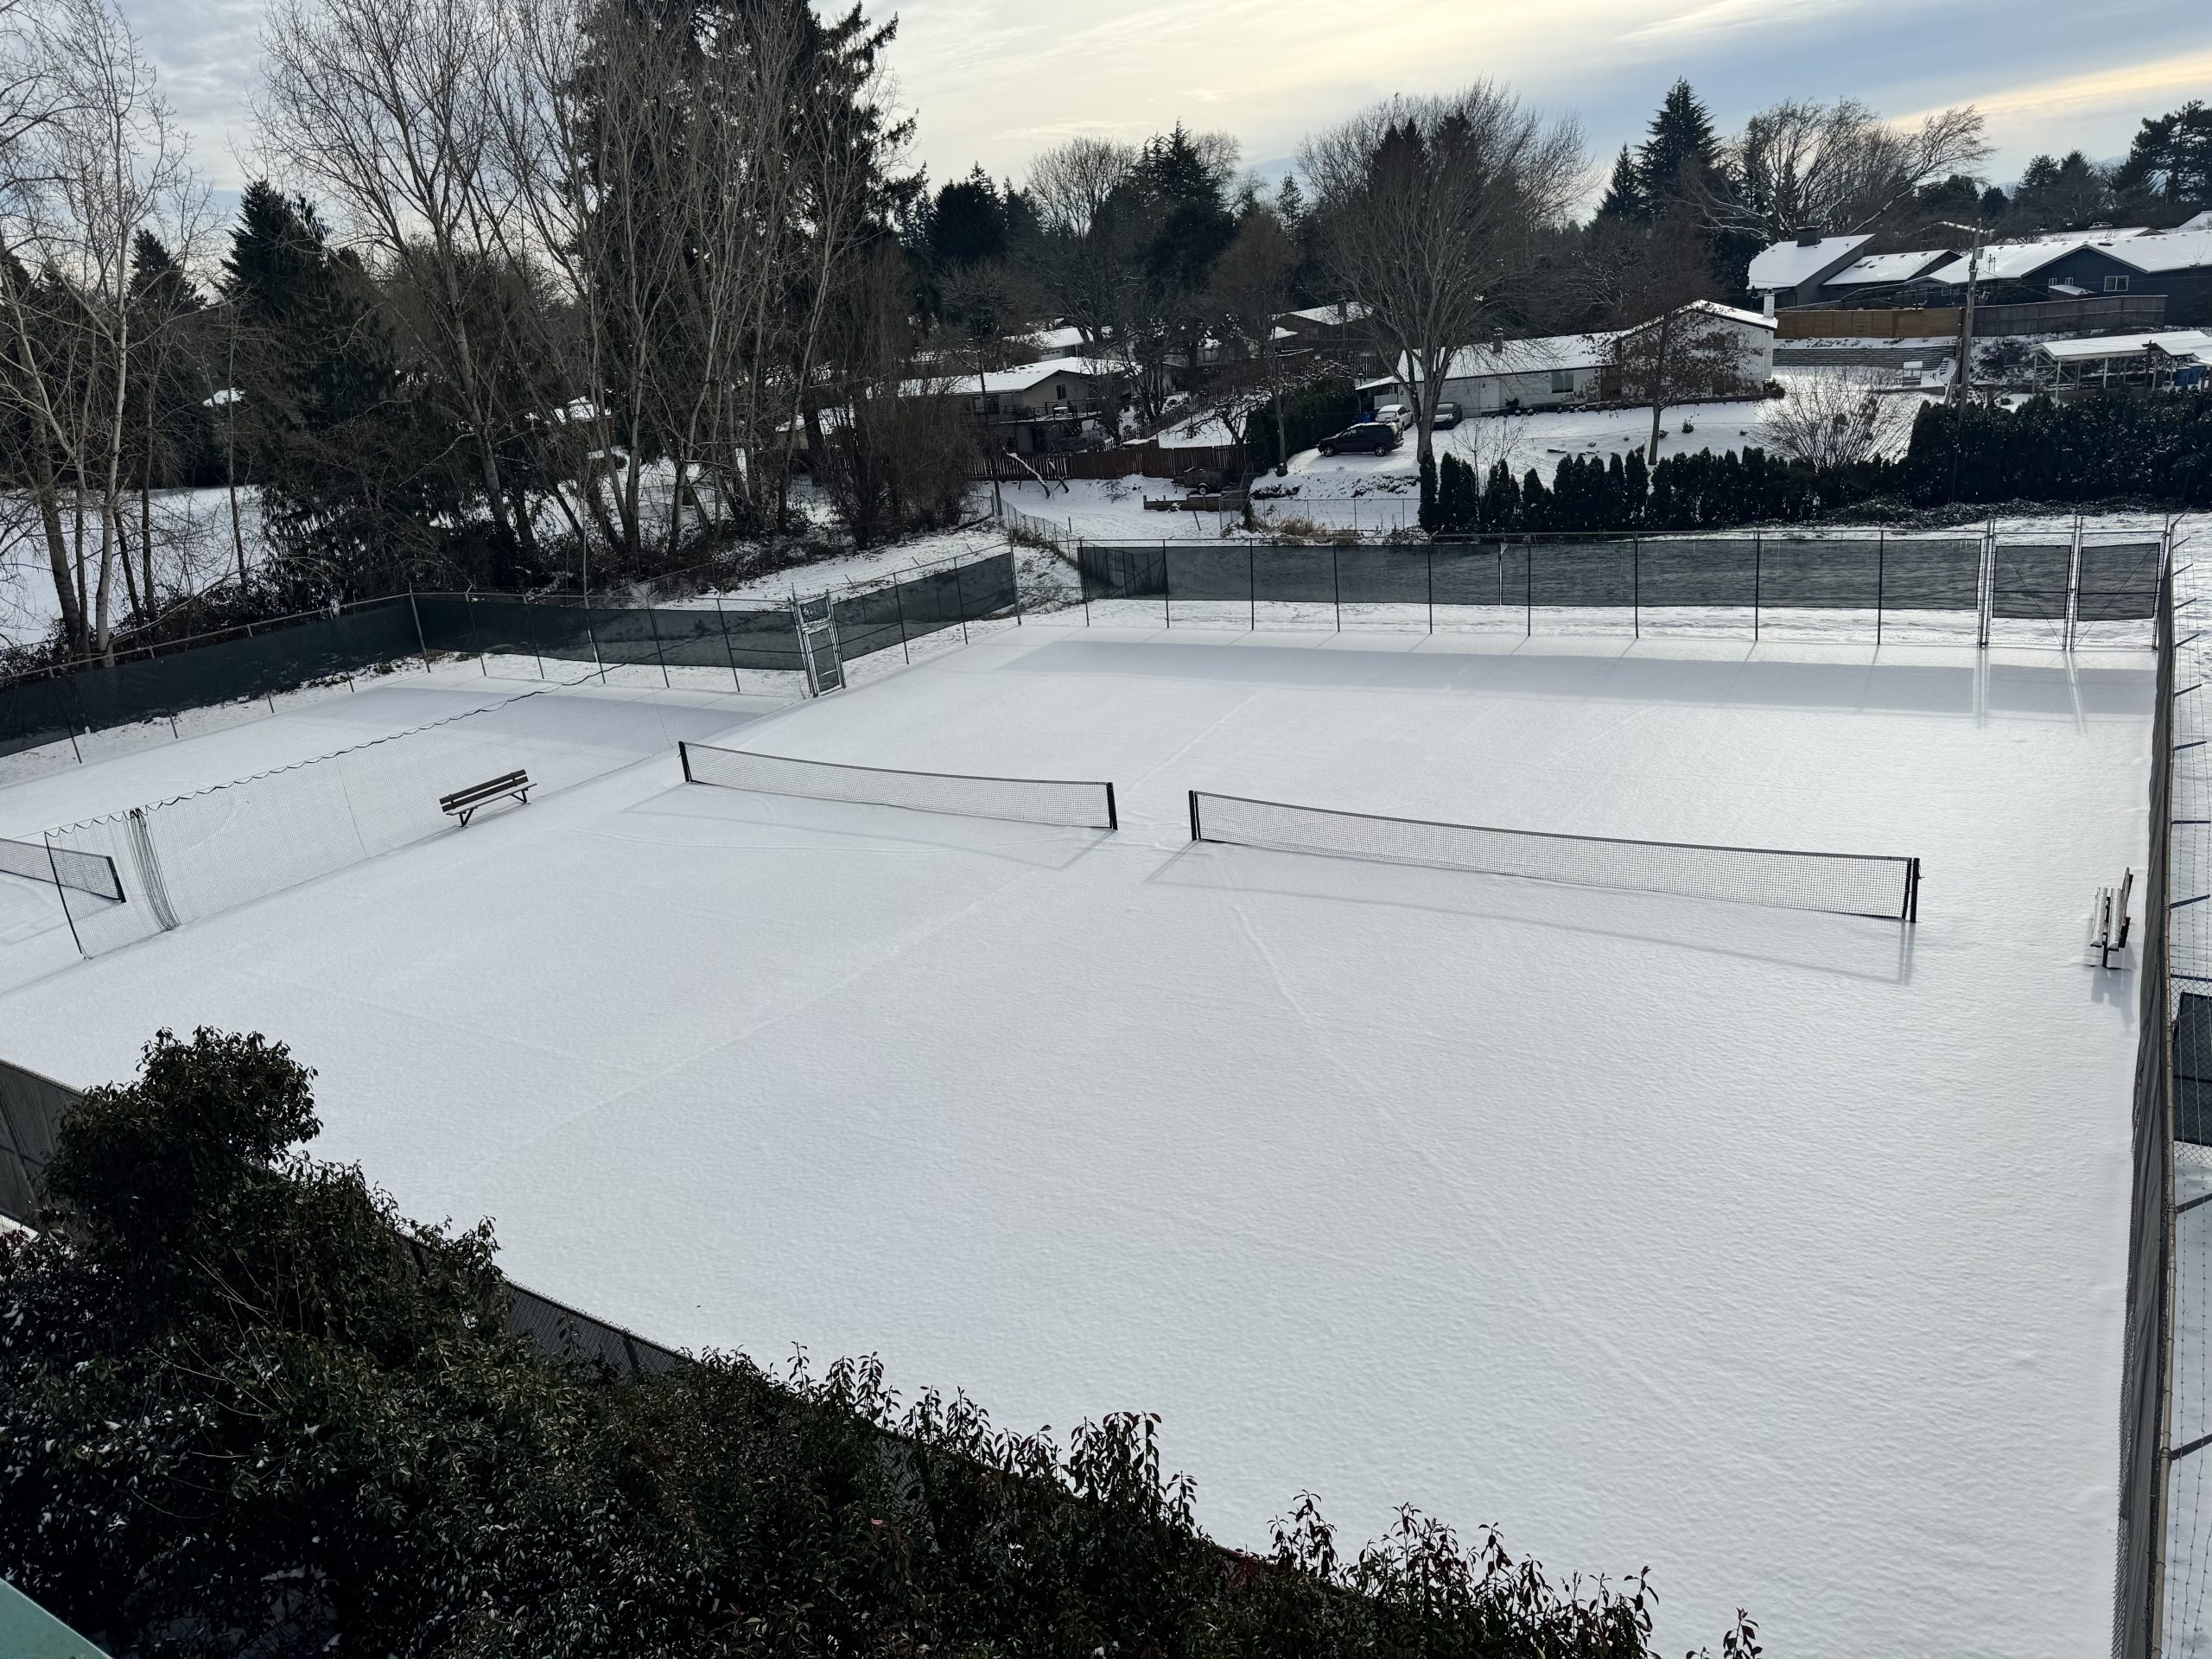 Our three outdoor tennis courts covered in a beautiful blanket of white snow.